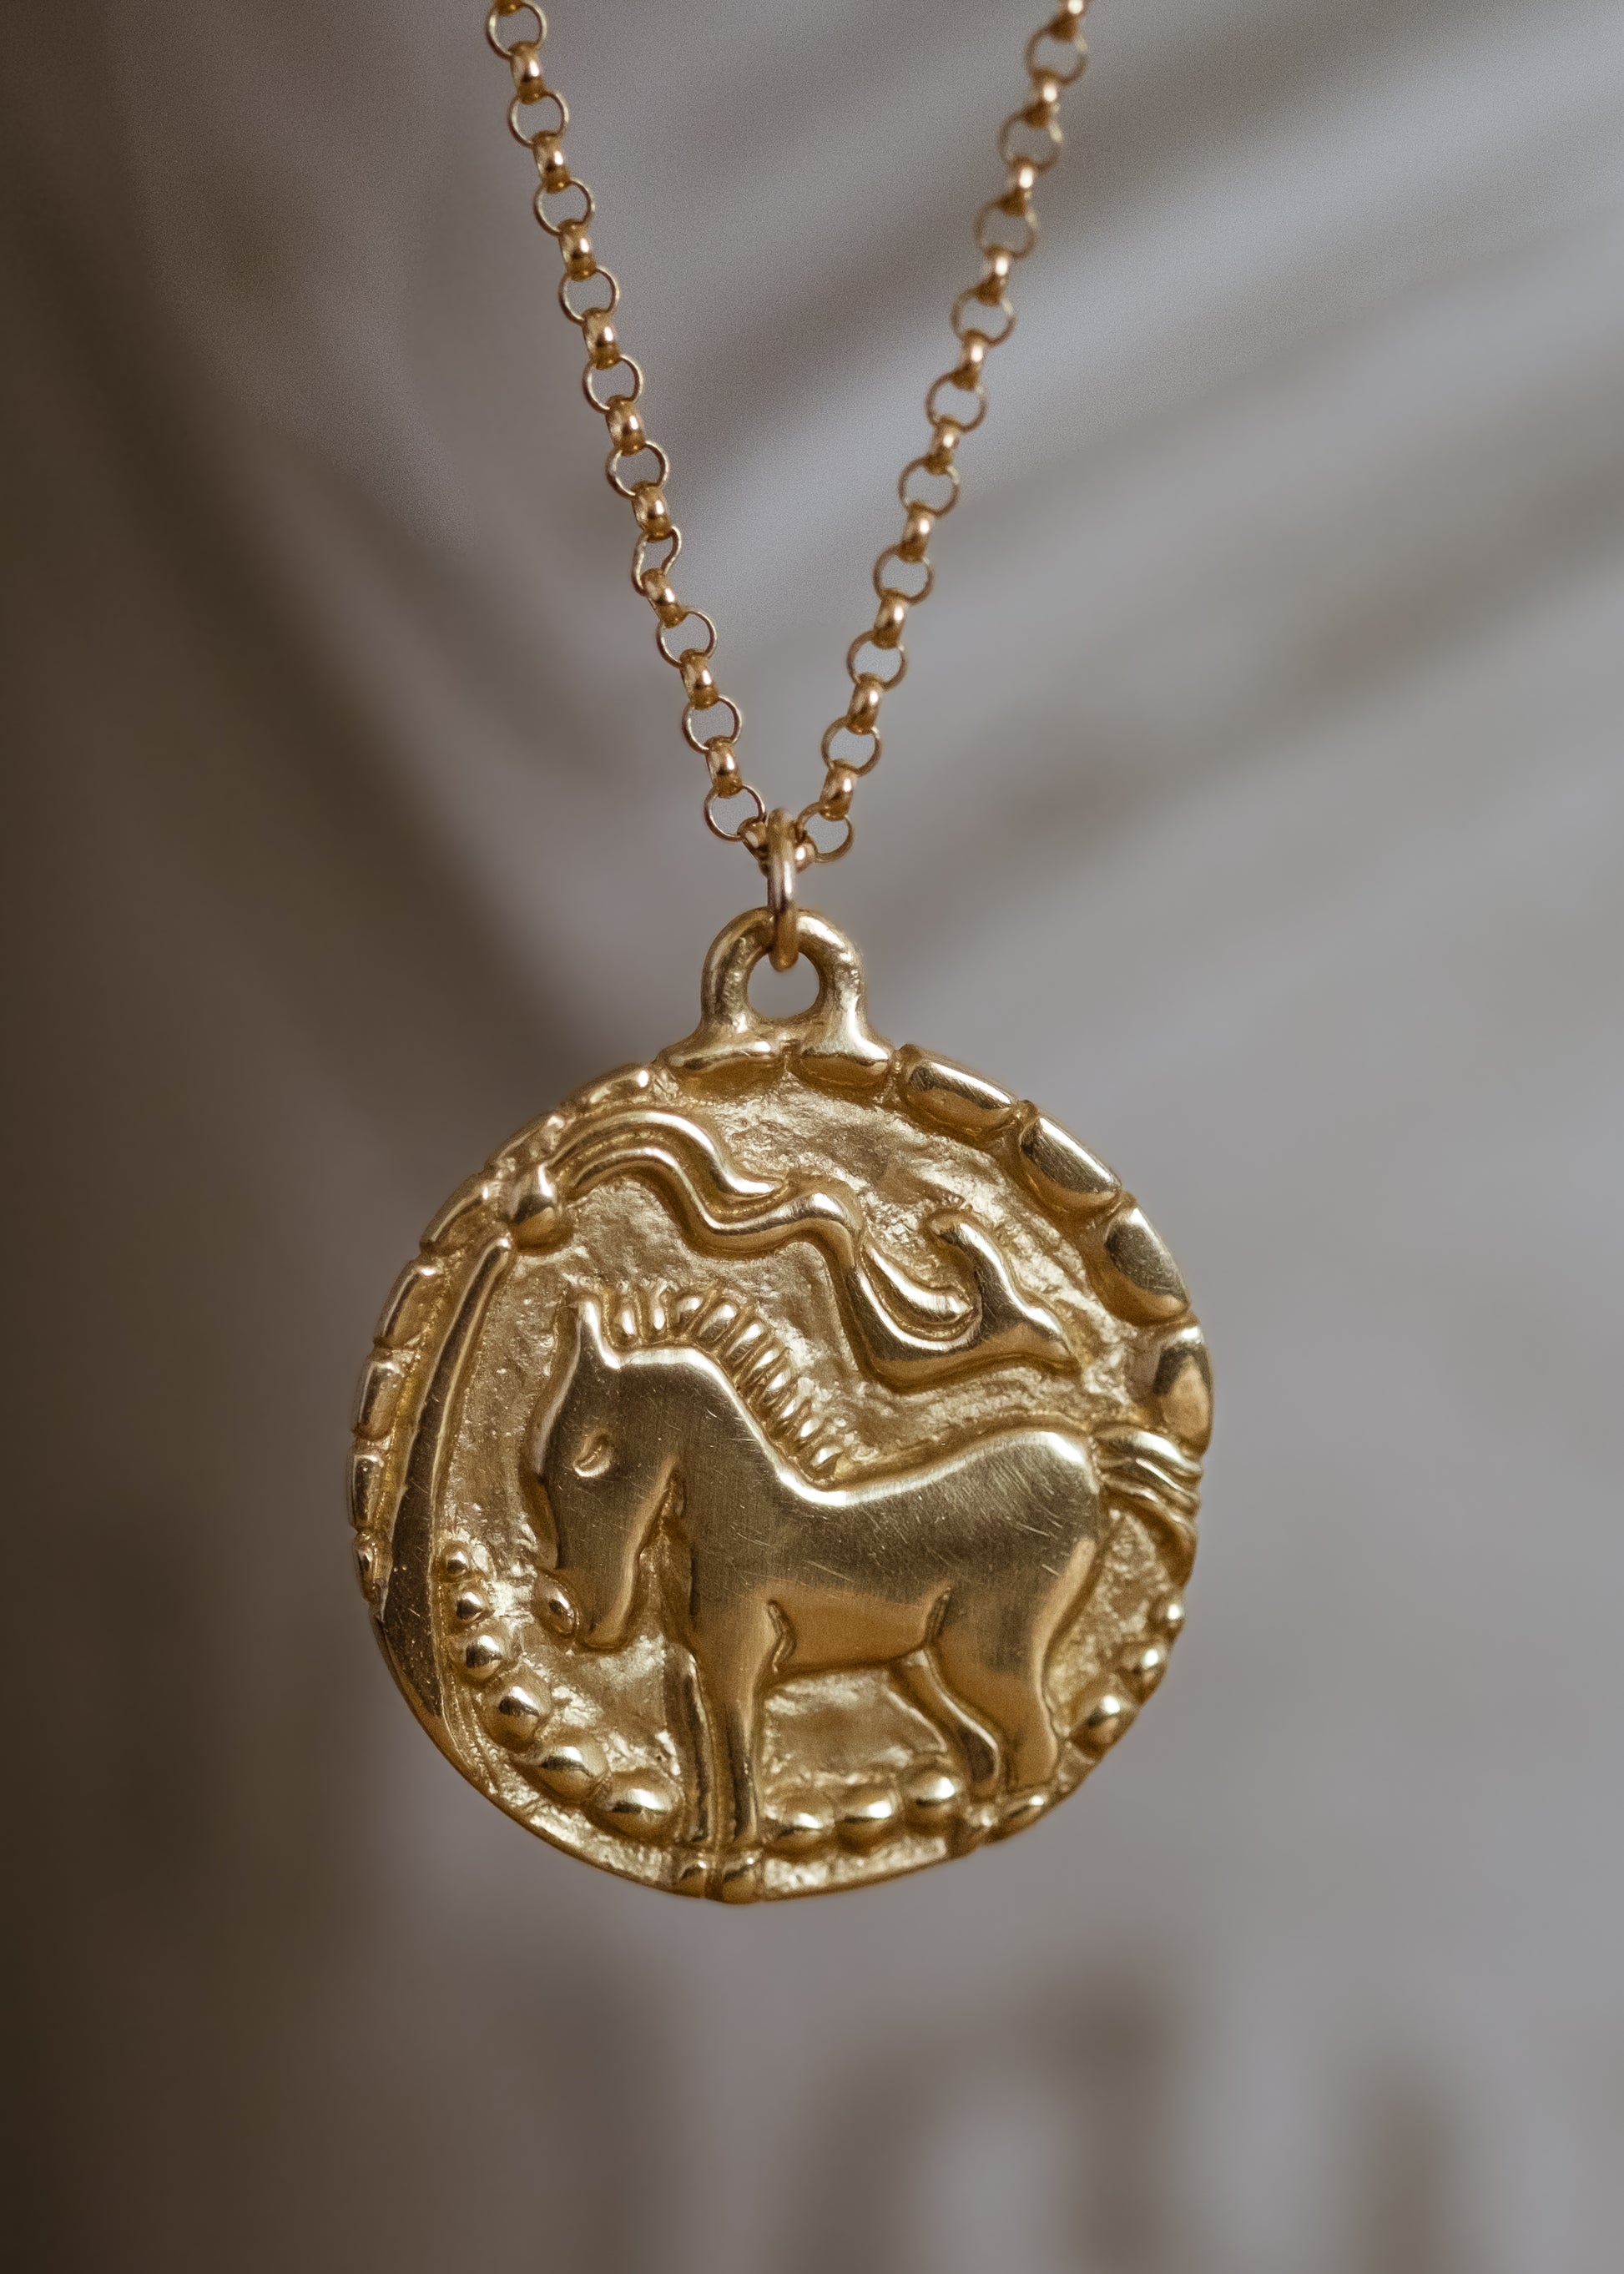 With its hand-carved horse—an embodiment of beauty and strength— and intricate detail, the Coronation necklace marries the artistry of metalwork with a spirit of whimsy and independence. A powerful totem of personal sovereignty. 